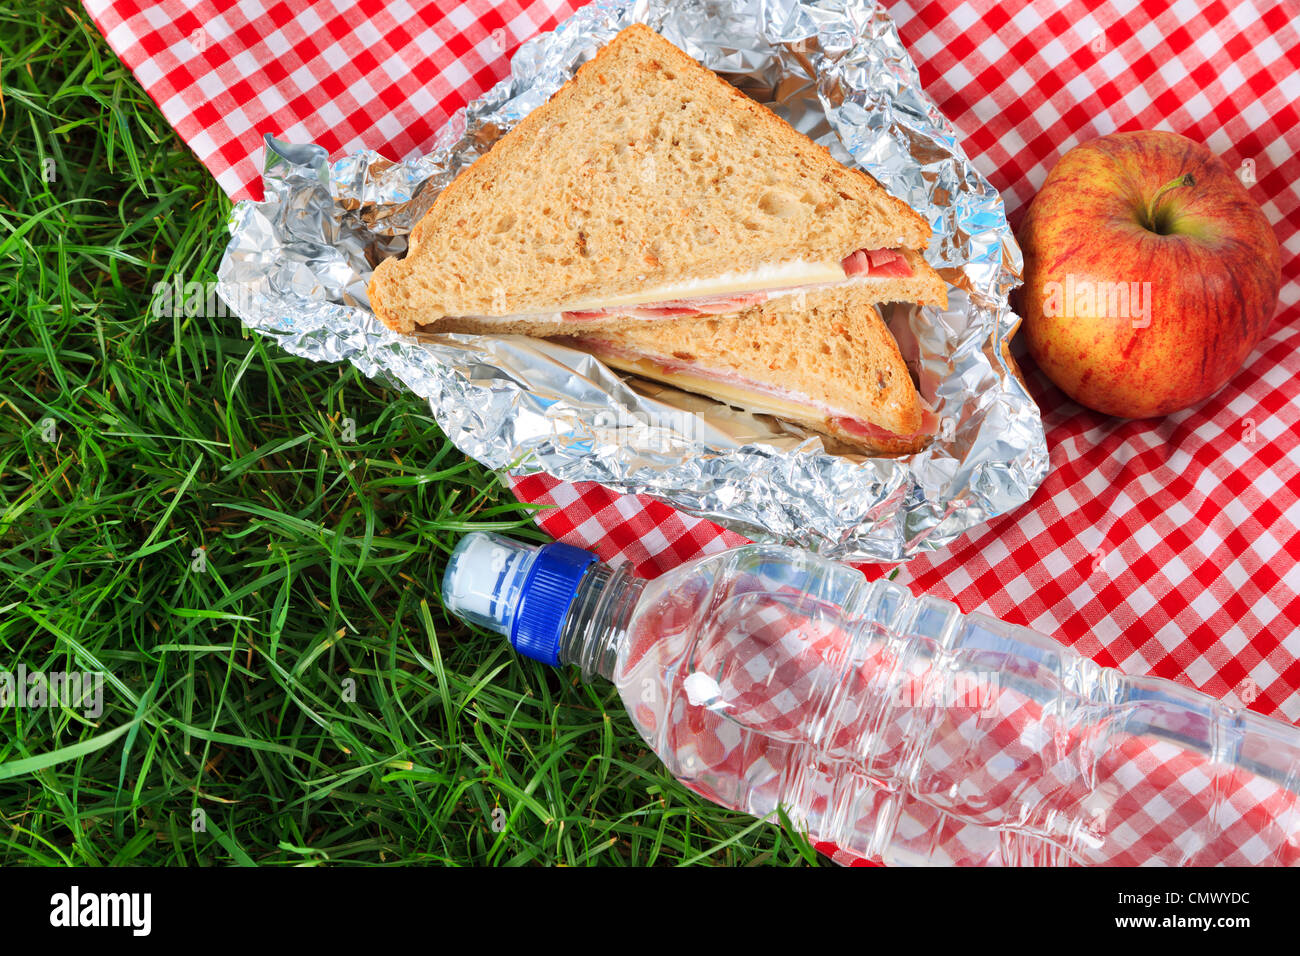 Photo of a picnic lunch consisting of a sandwich, an apple and a bottle of mineral water all on a red checkered cloth. Stock Photo